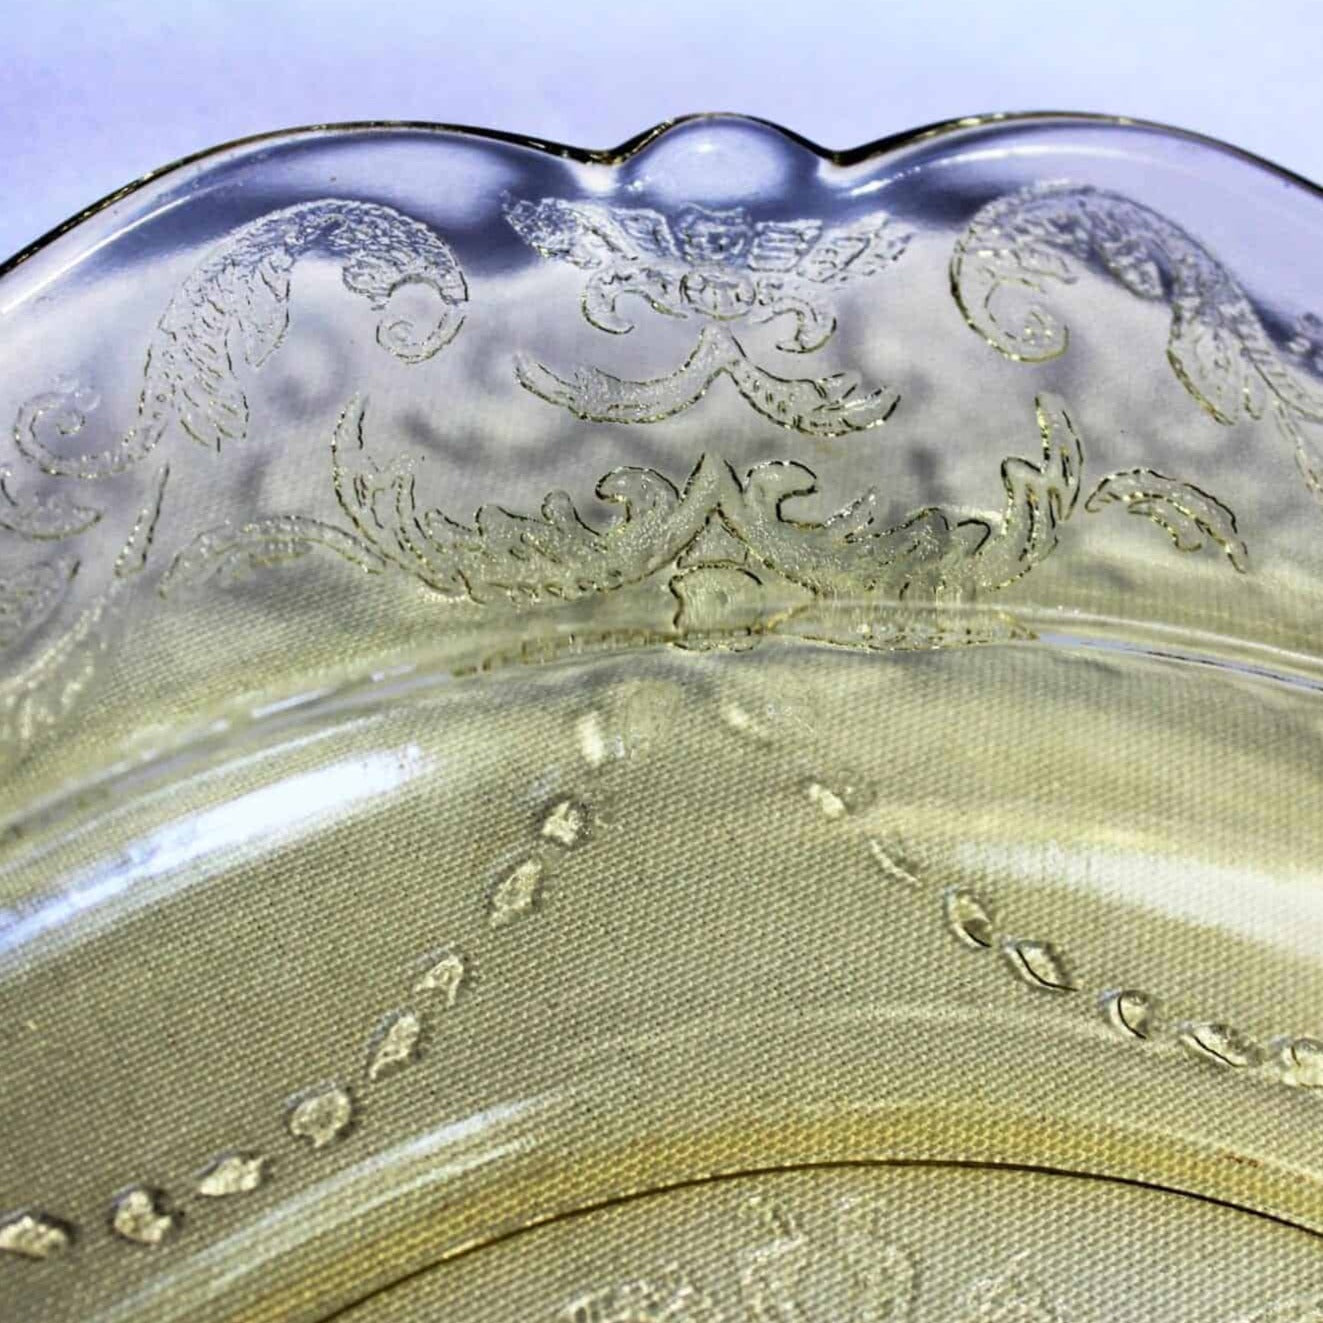 Luncheon Plate, Indiana Glass, Recollection (Federal Glass-Madrid), Depression Glass, Vintage